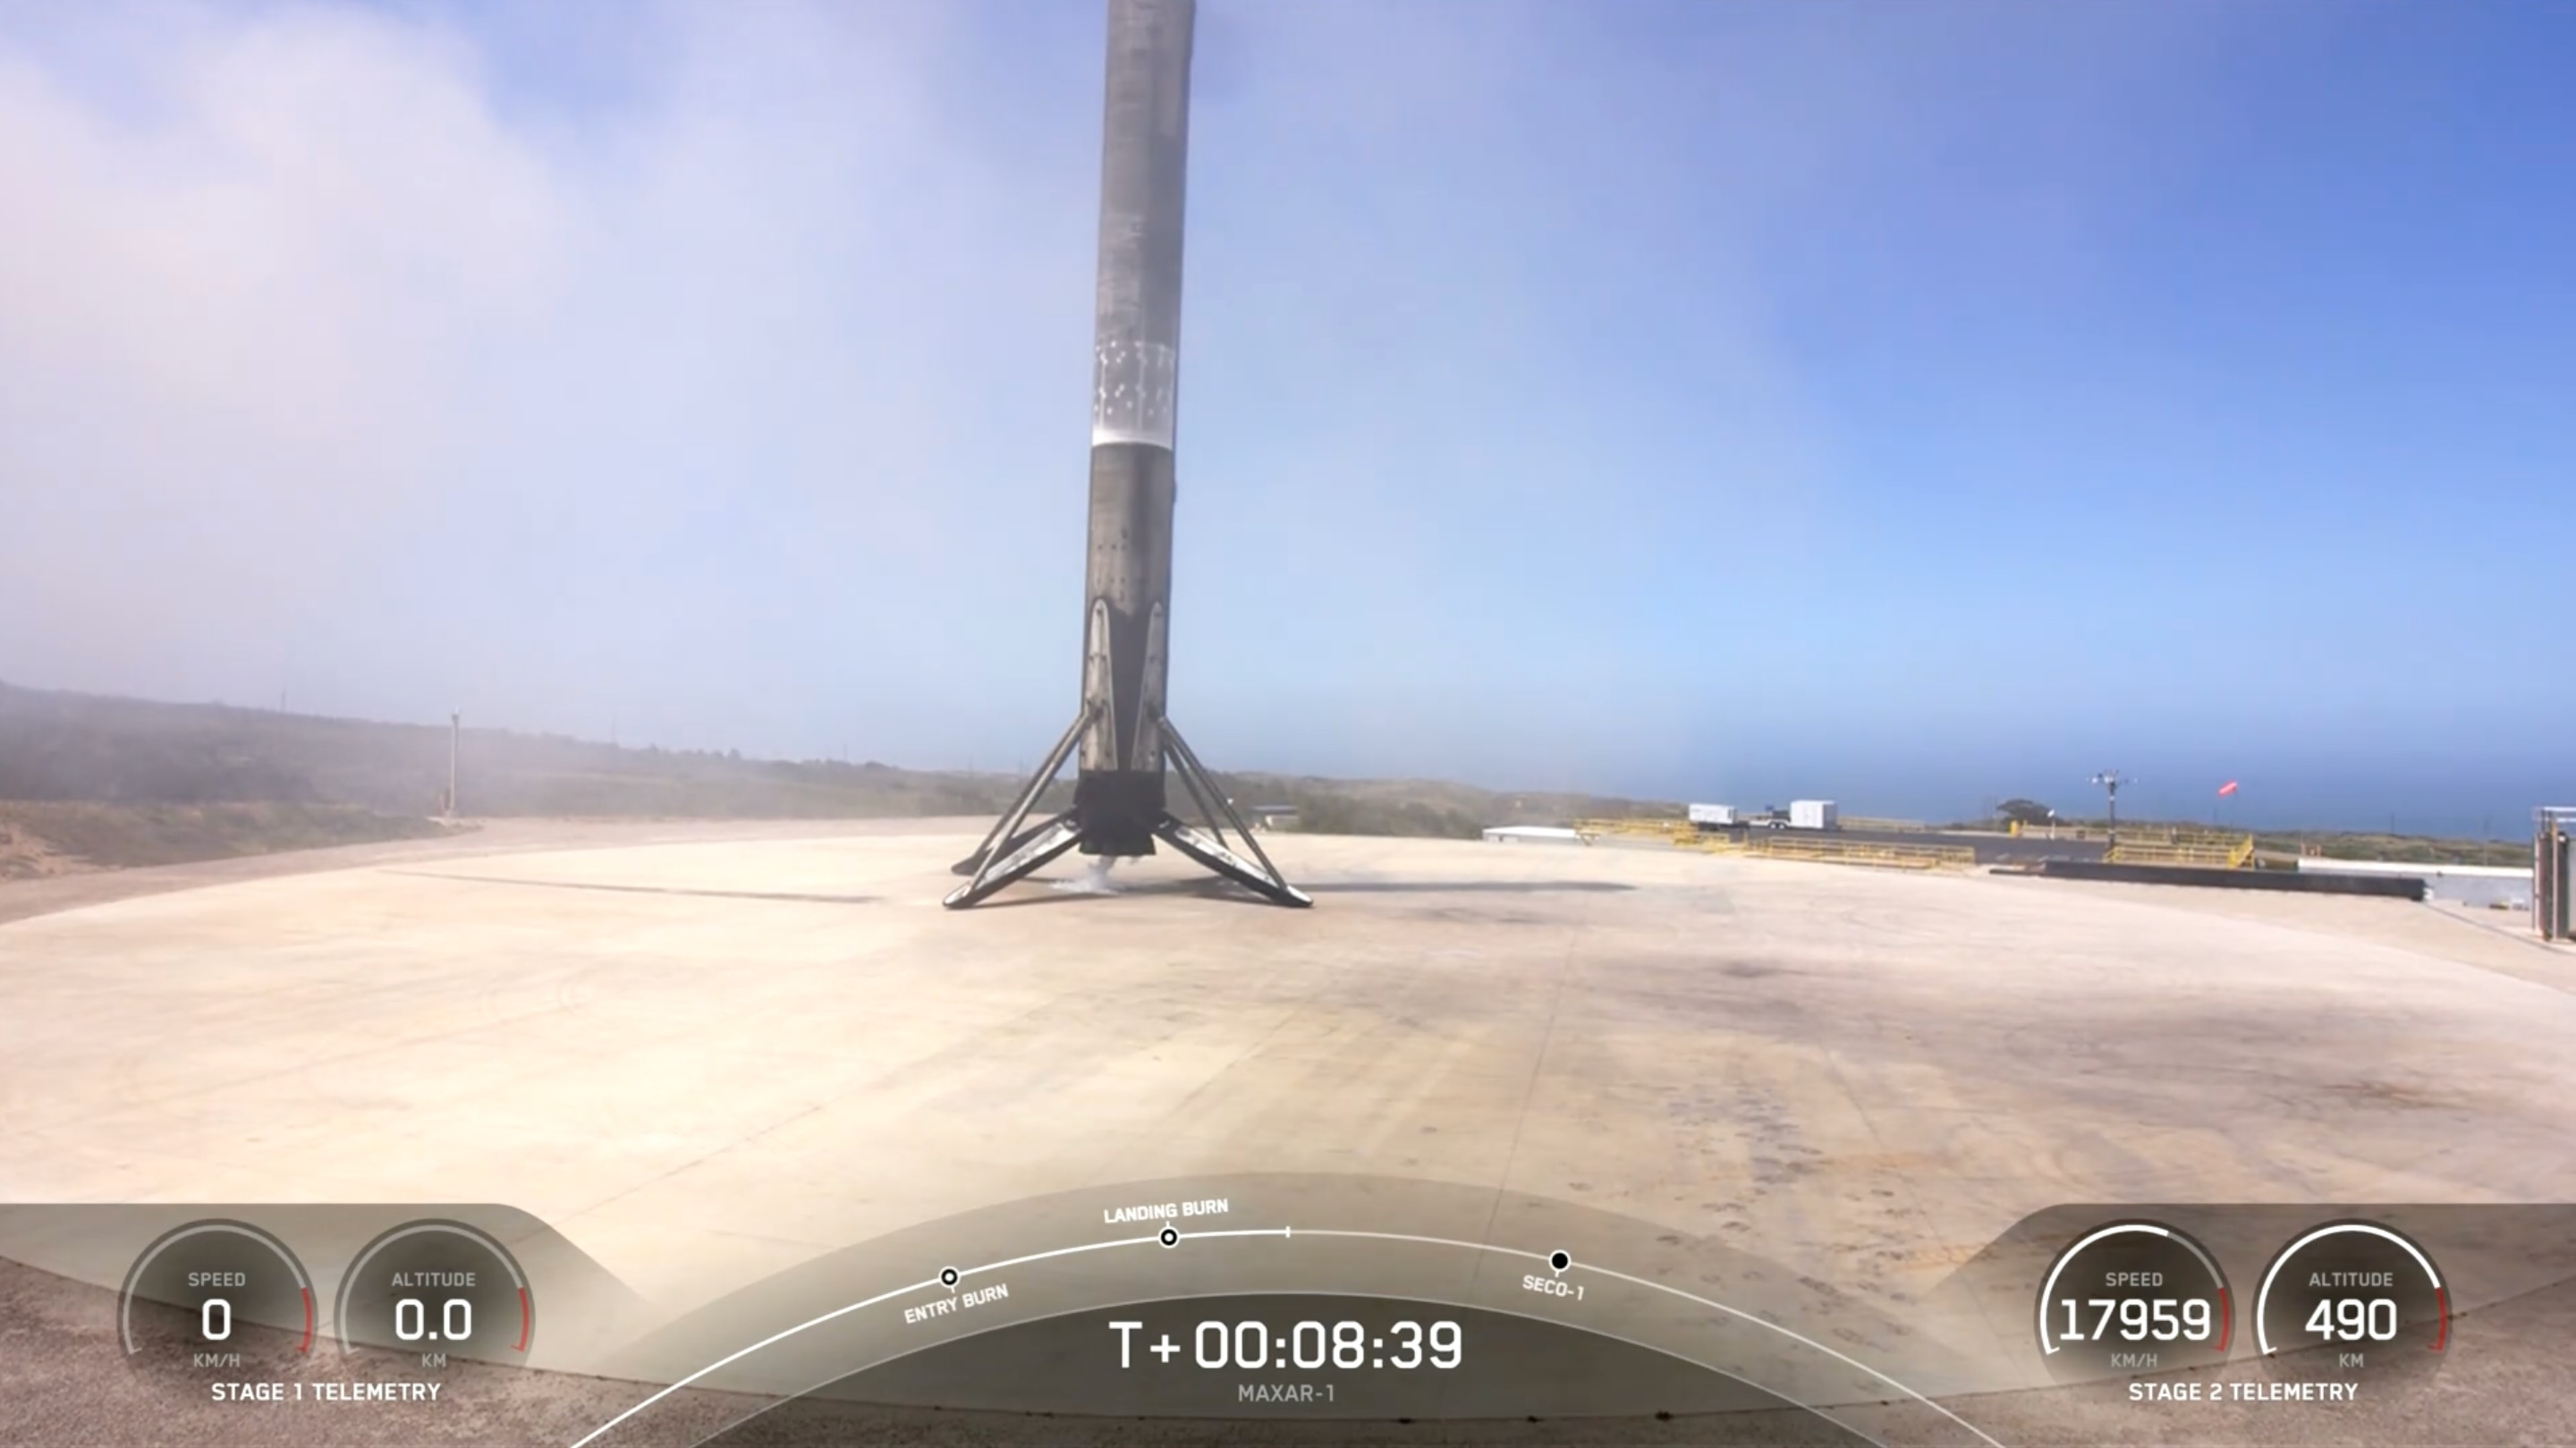 A black and white spacex falcon 9 rocket first stage sits on a landing pad shortly after touching down.